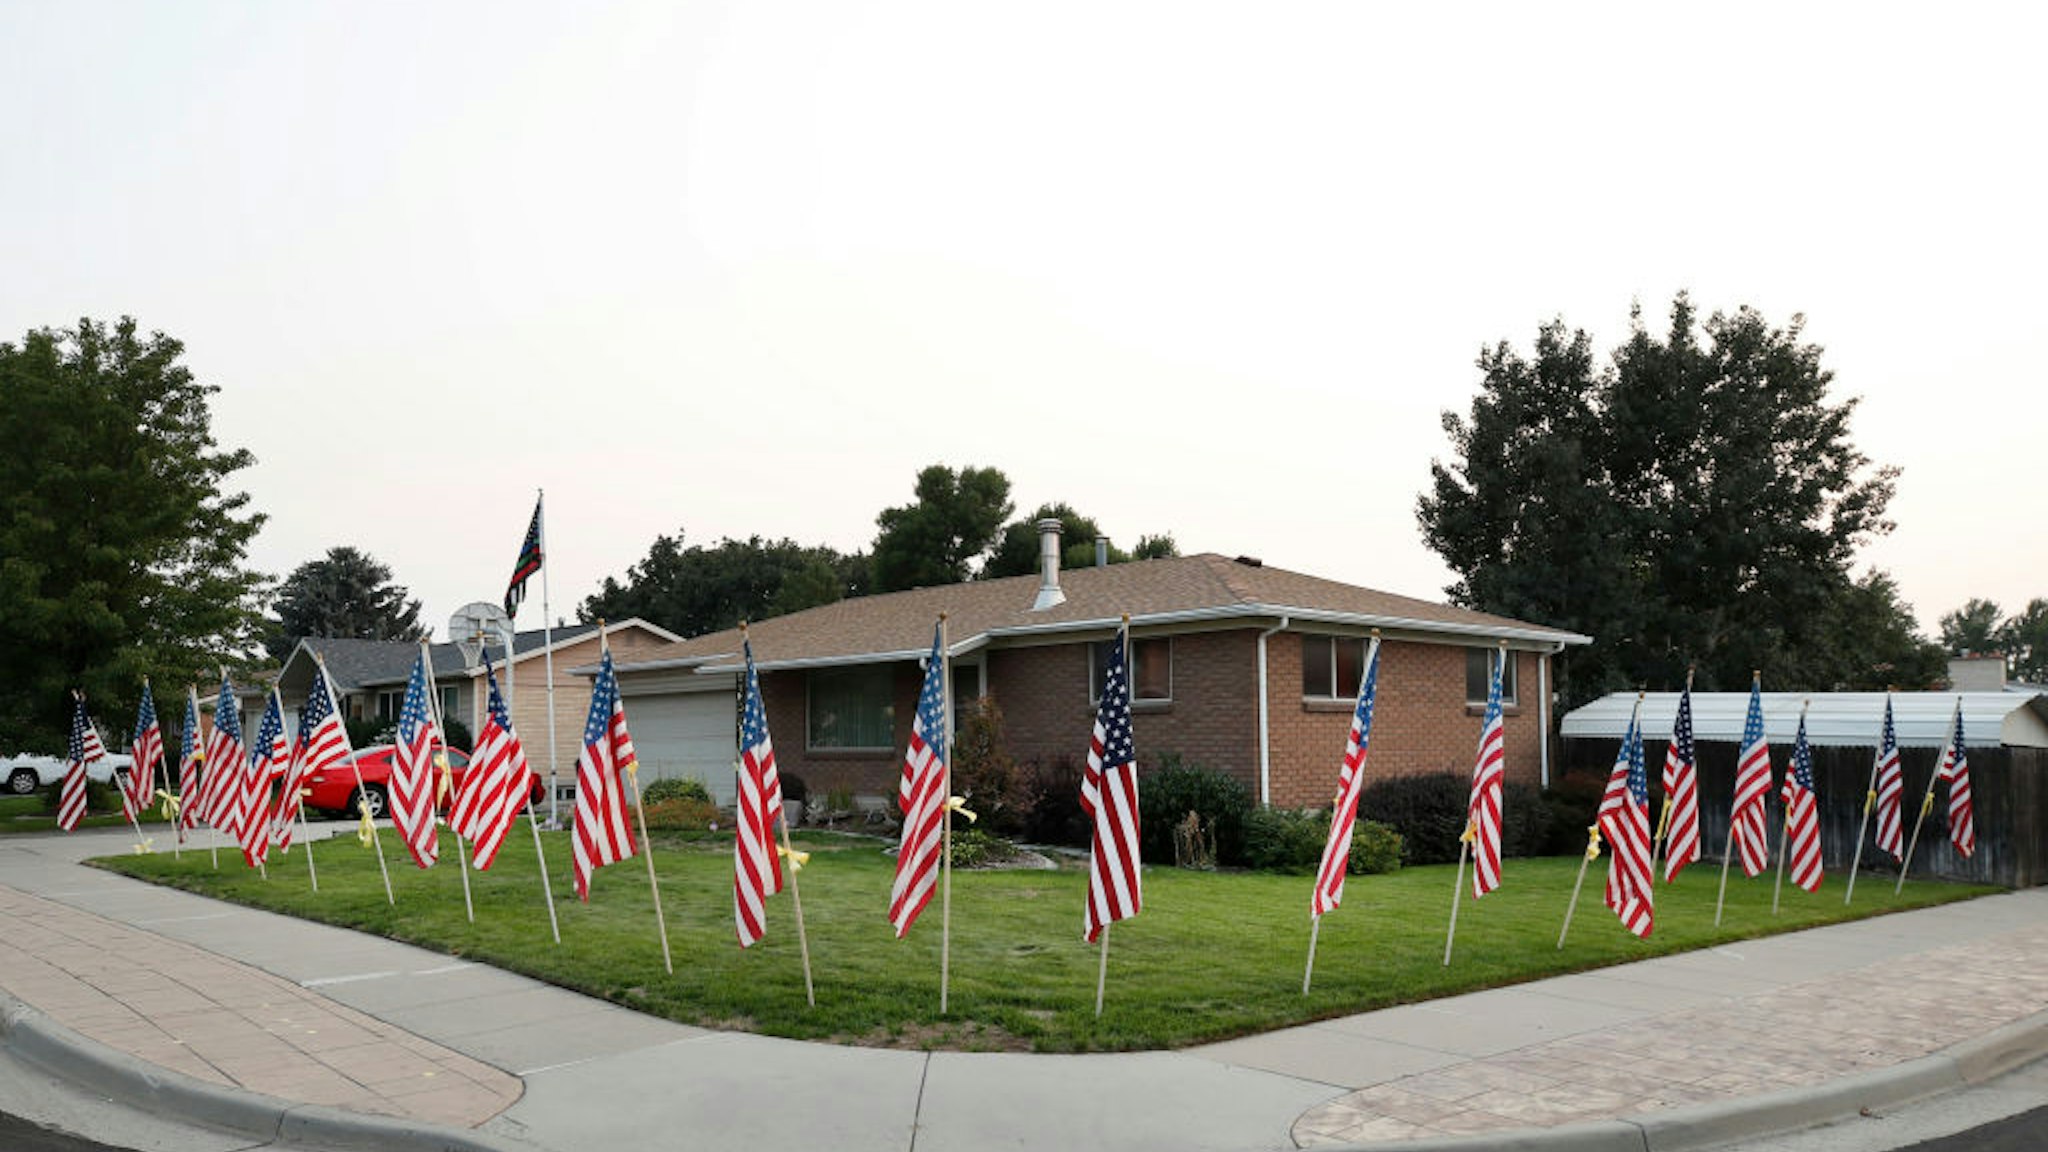 American flags and yellow ribbons line the sidewalk outside the house of Darren Hoover, whose son, Staff Sgt. Taylor Hoover was killed in Afghanistan, on August 27, 2021 in Sandy, Utah.